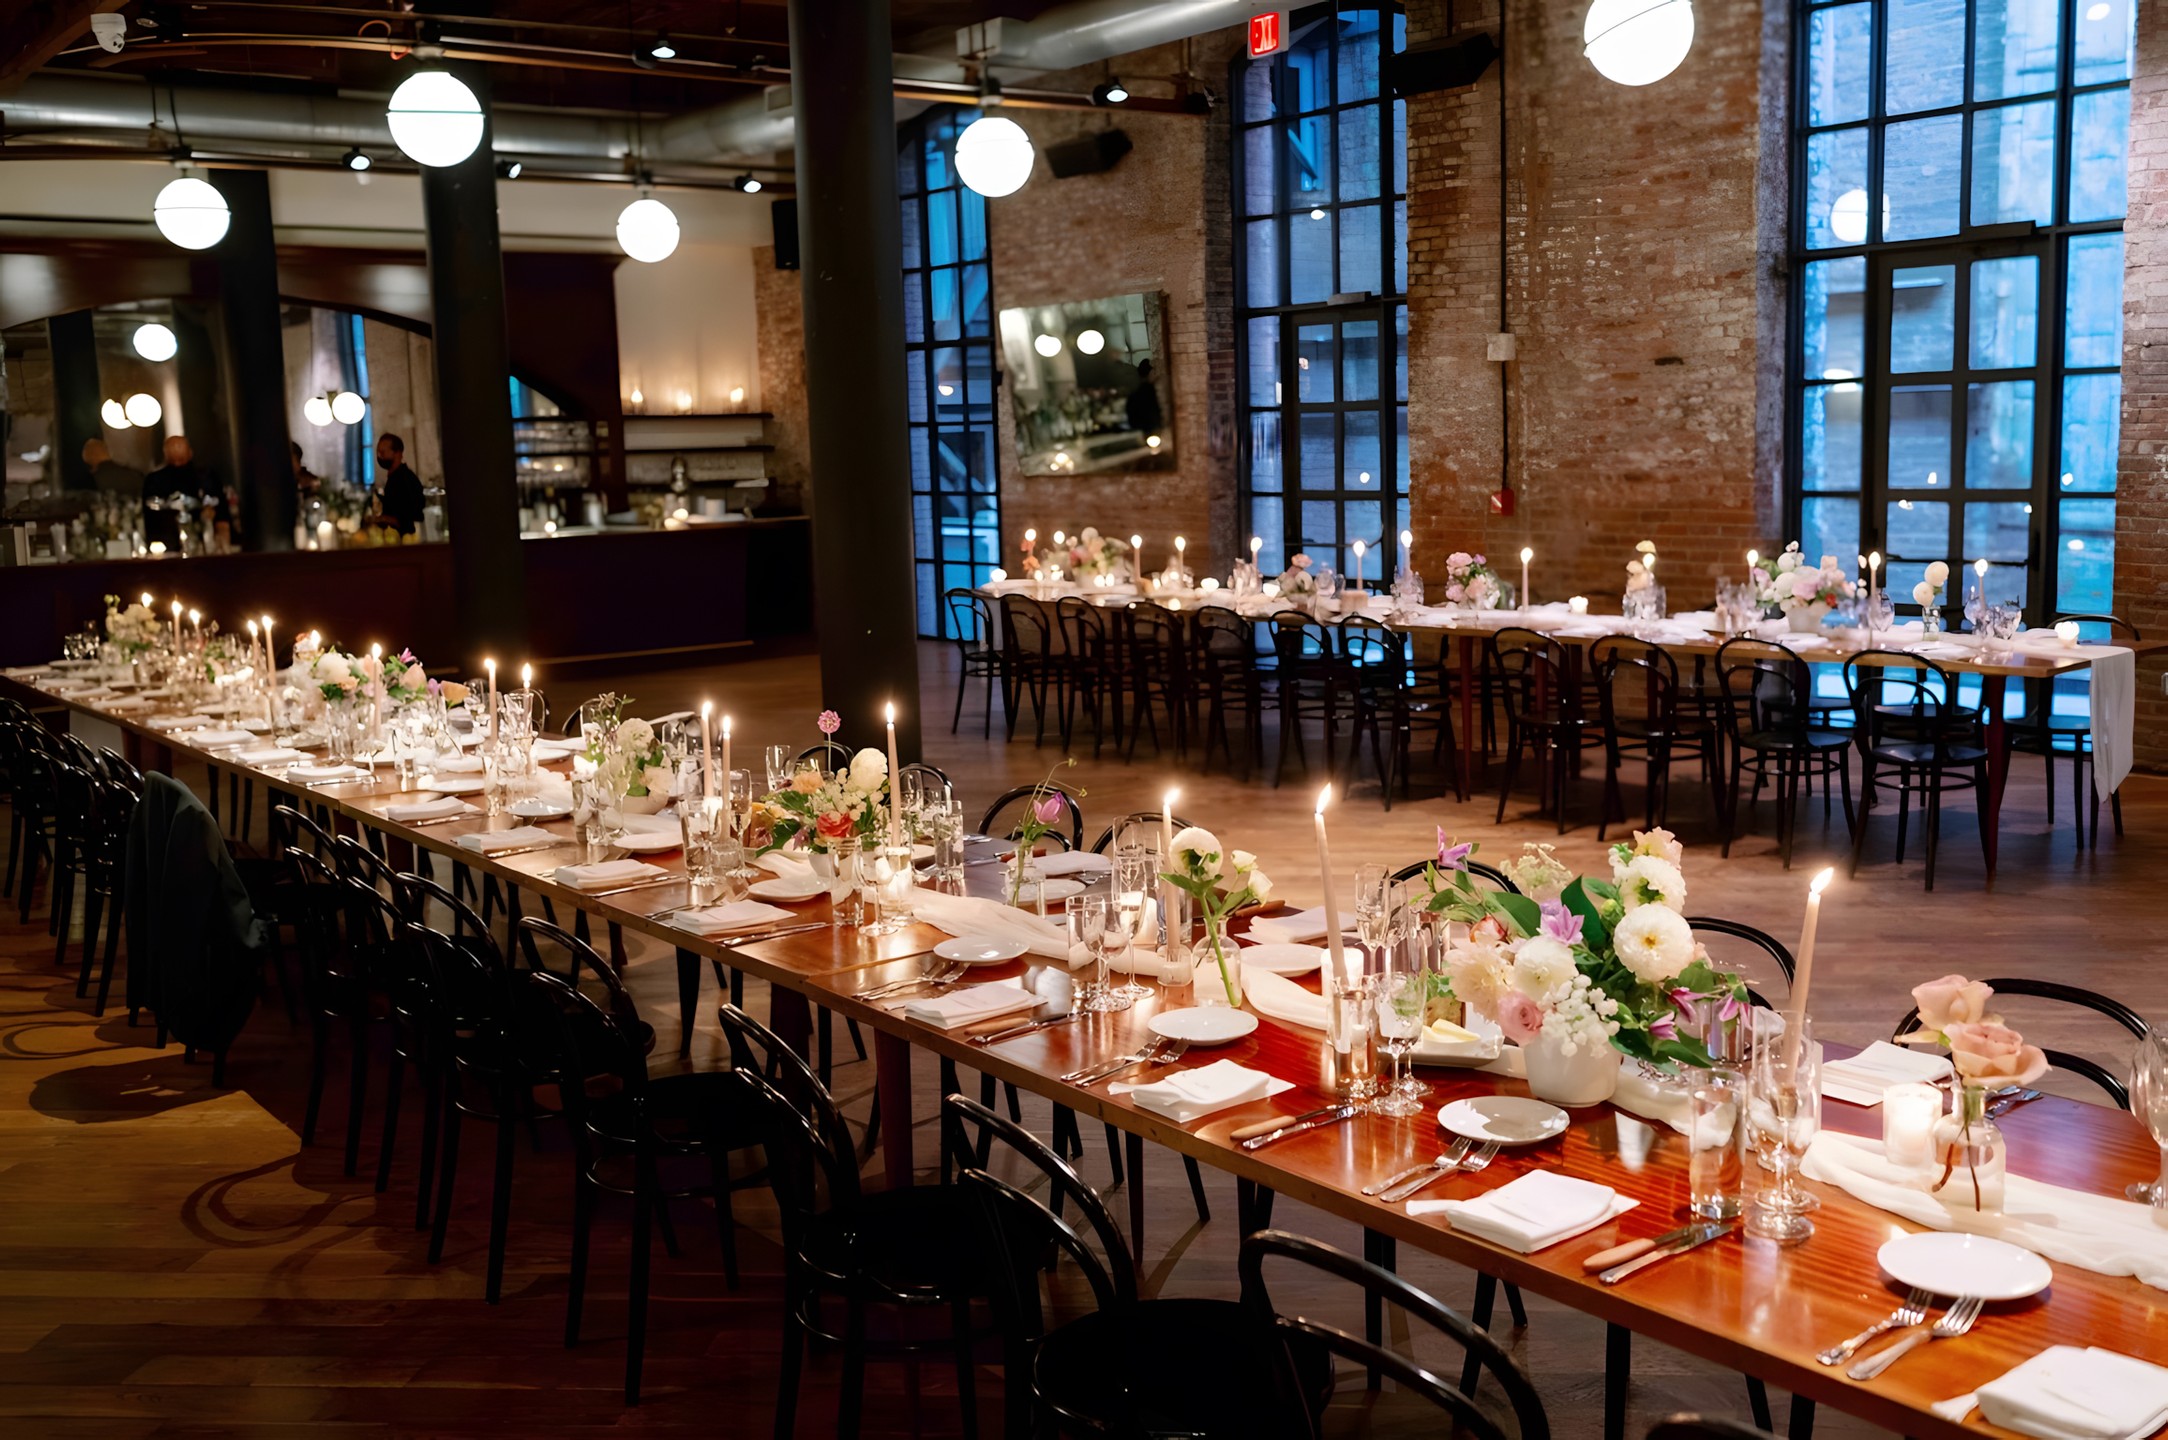 Reception dinner table at Wythe Hotel with candles, long tables, florals.